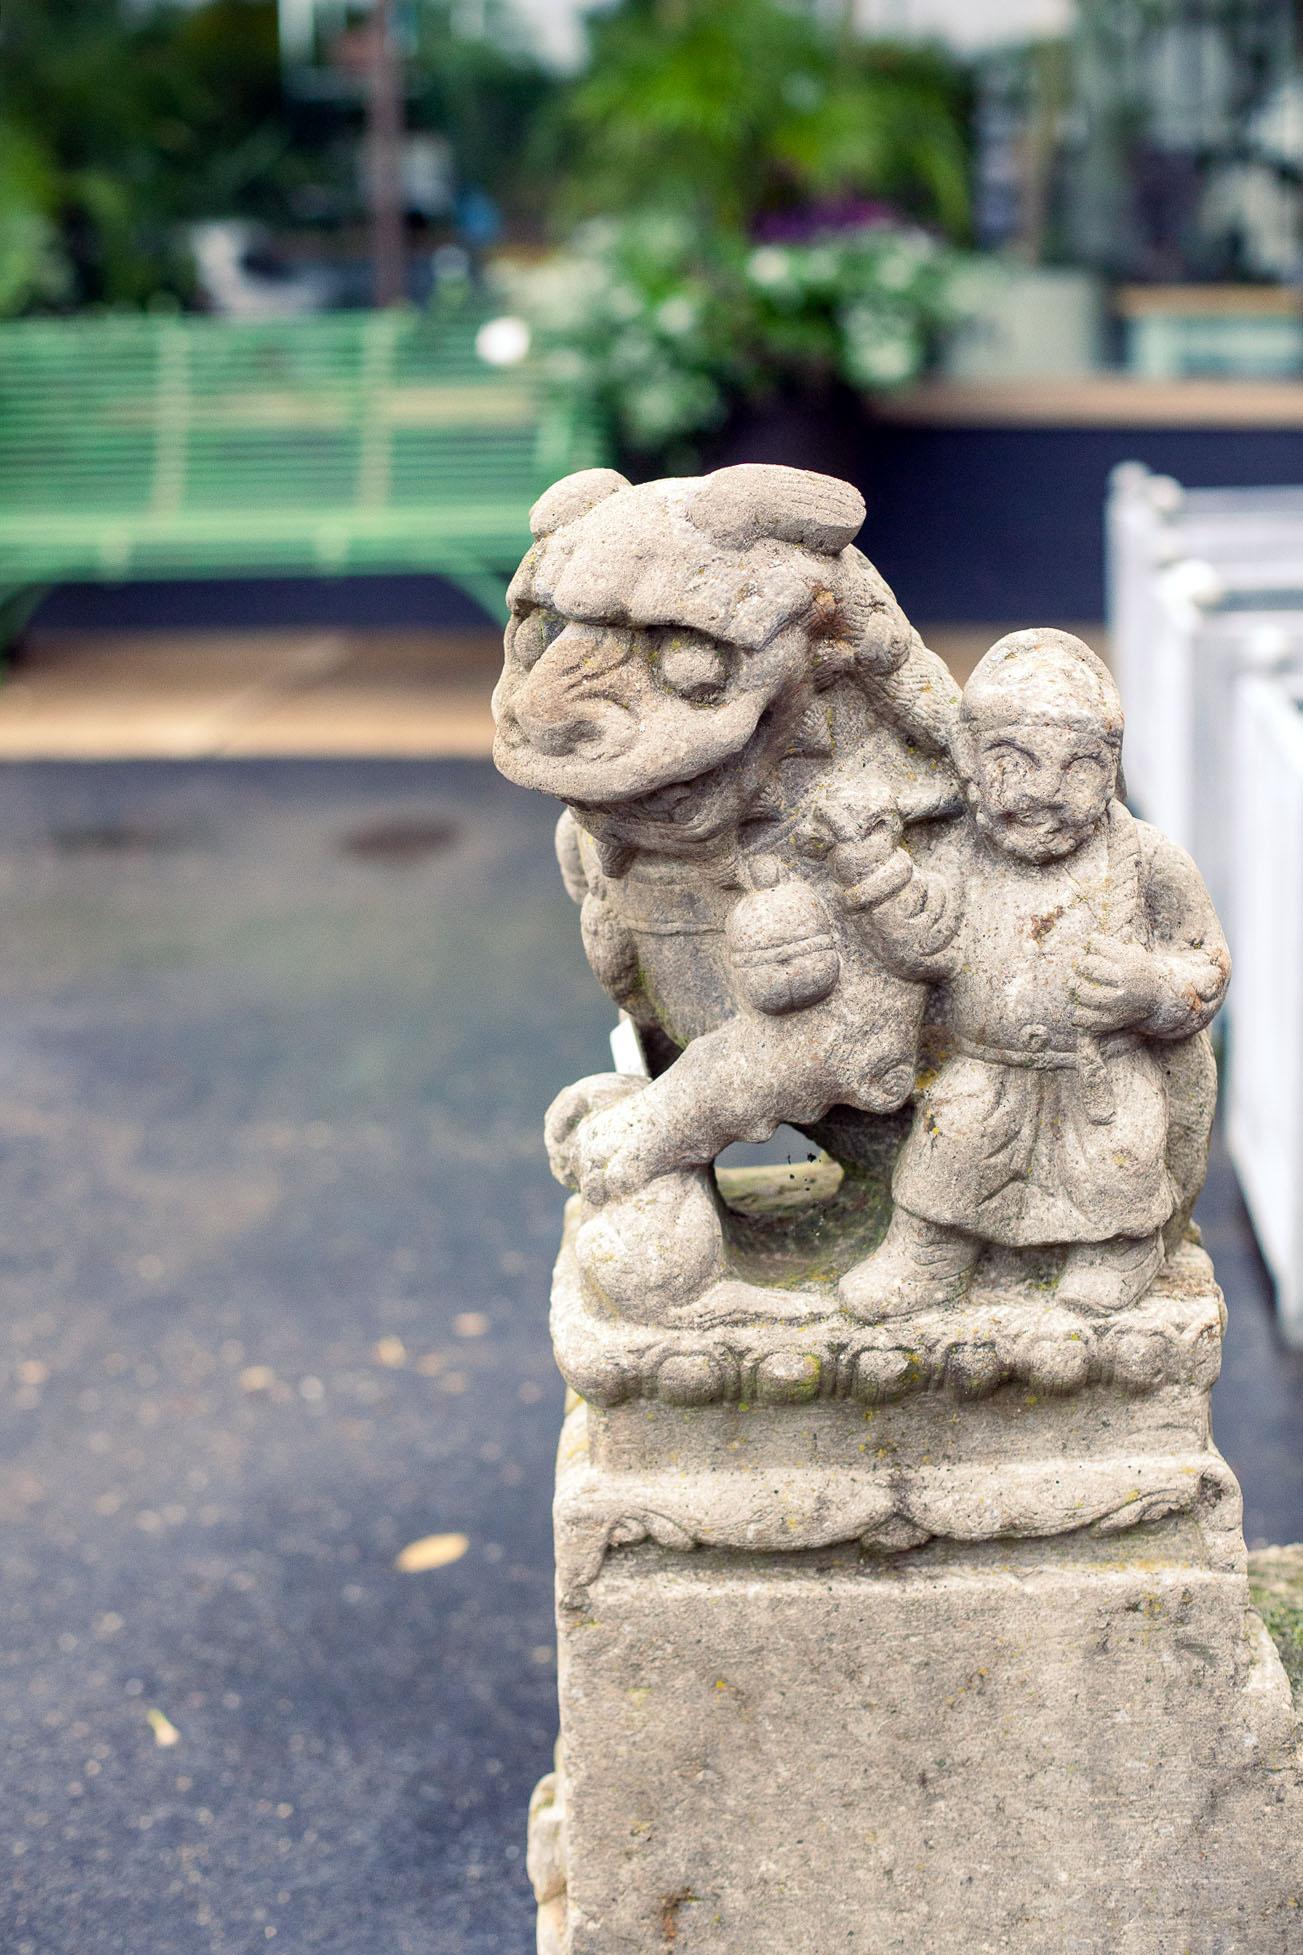 Fleurdetroit presents for your consideration a very fine pair of carved antique Foo Dogs.

These stone pieces have a very old weathered surface and would be fabulous additions to any interior or exterior space.